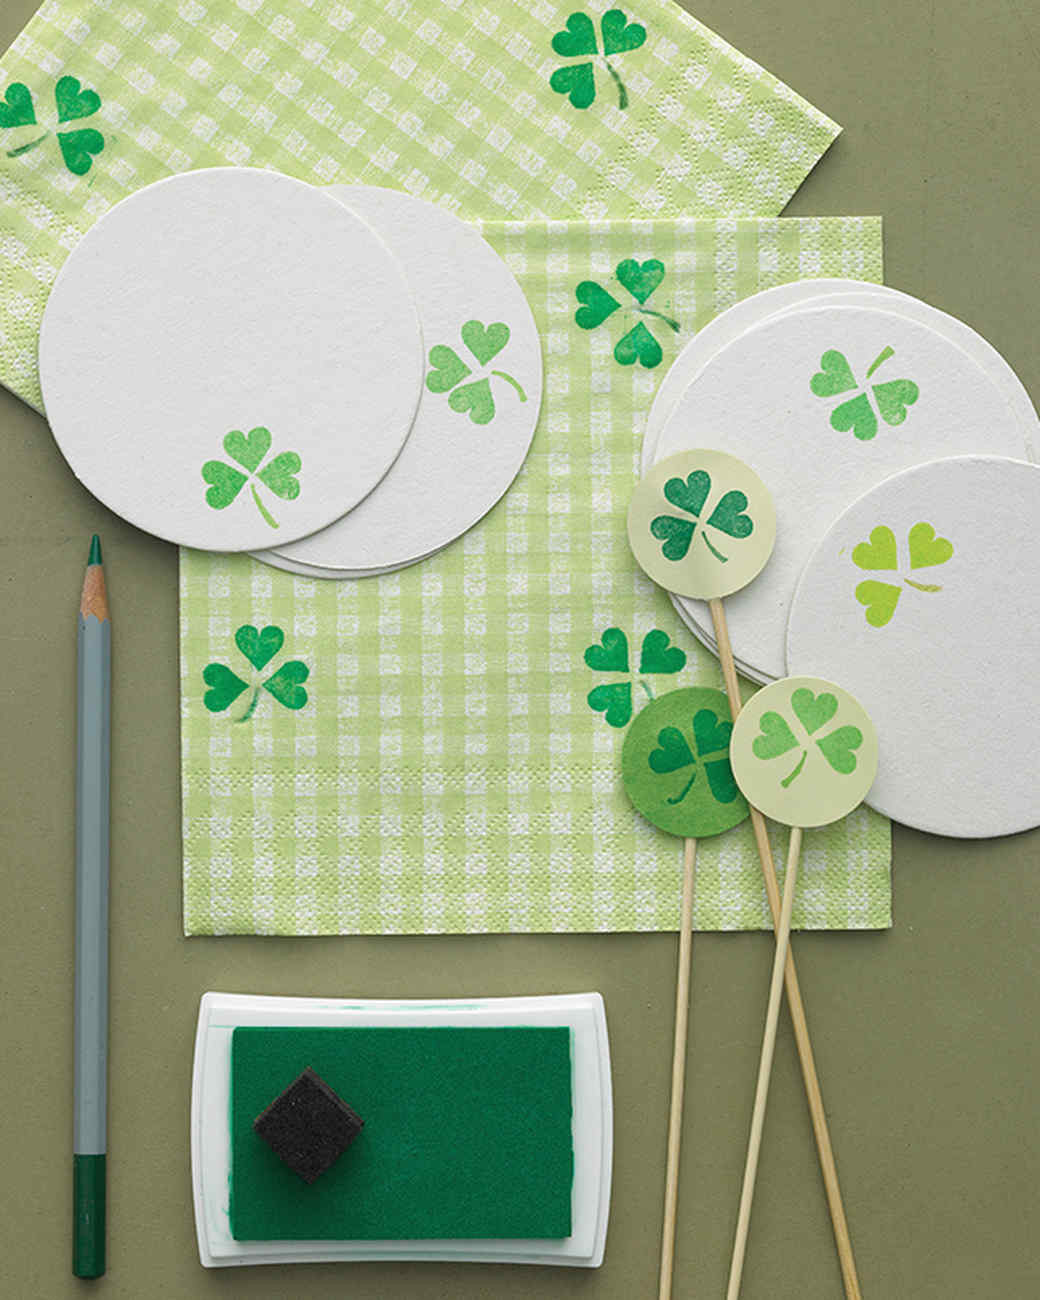 Saint Patrick Day Crafts
 The Best St Patrick s Day Crafts and Decorations